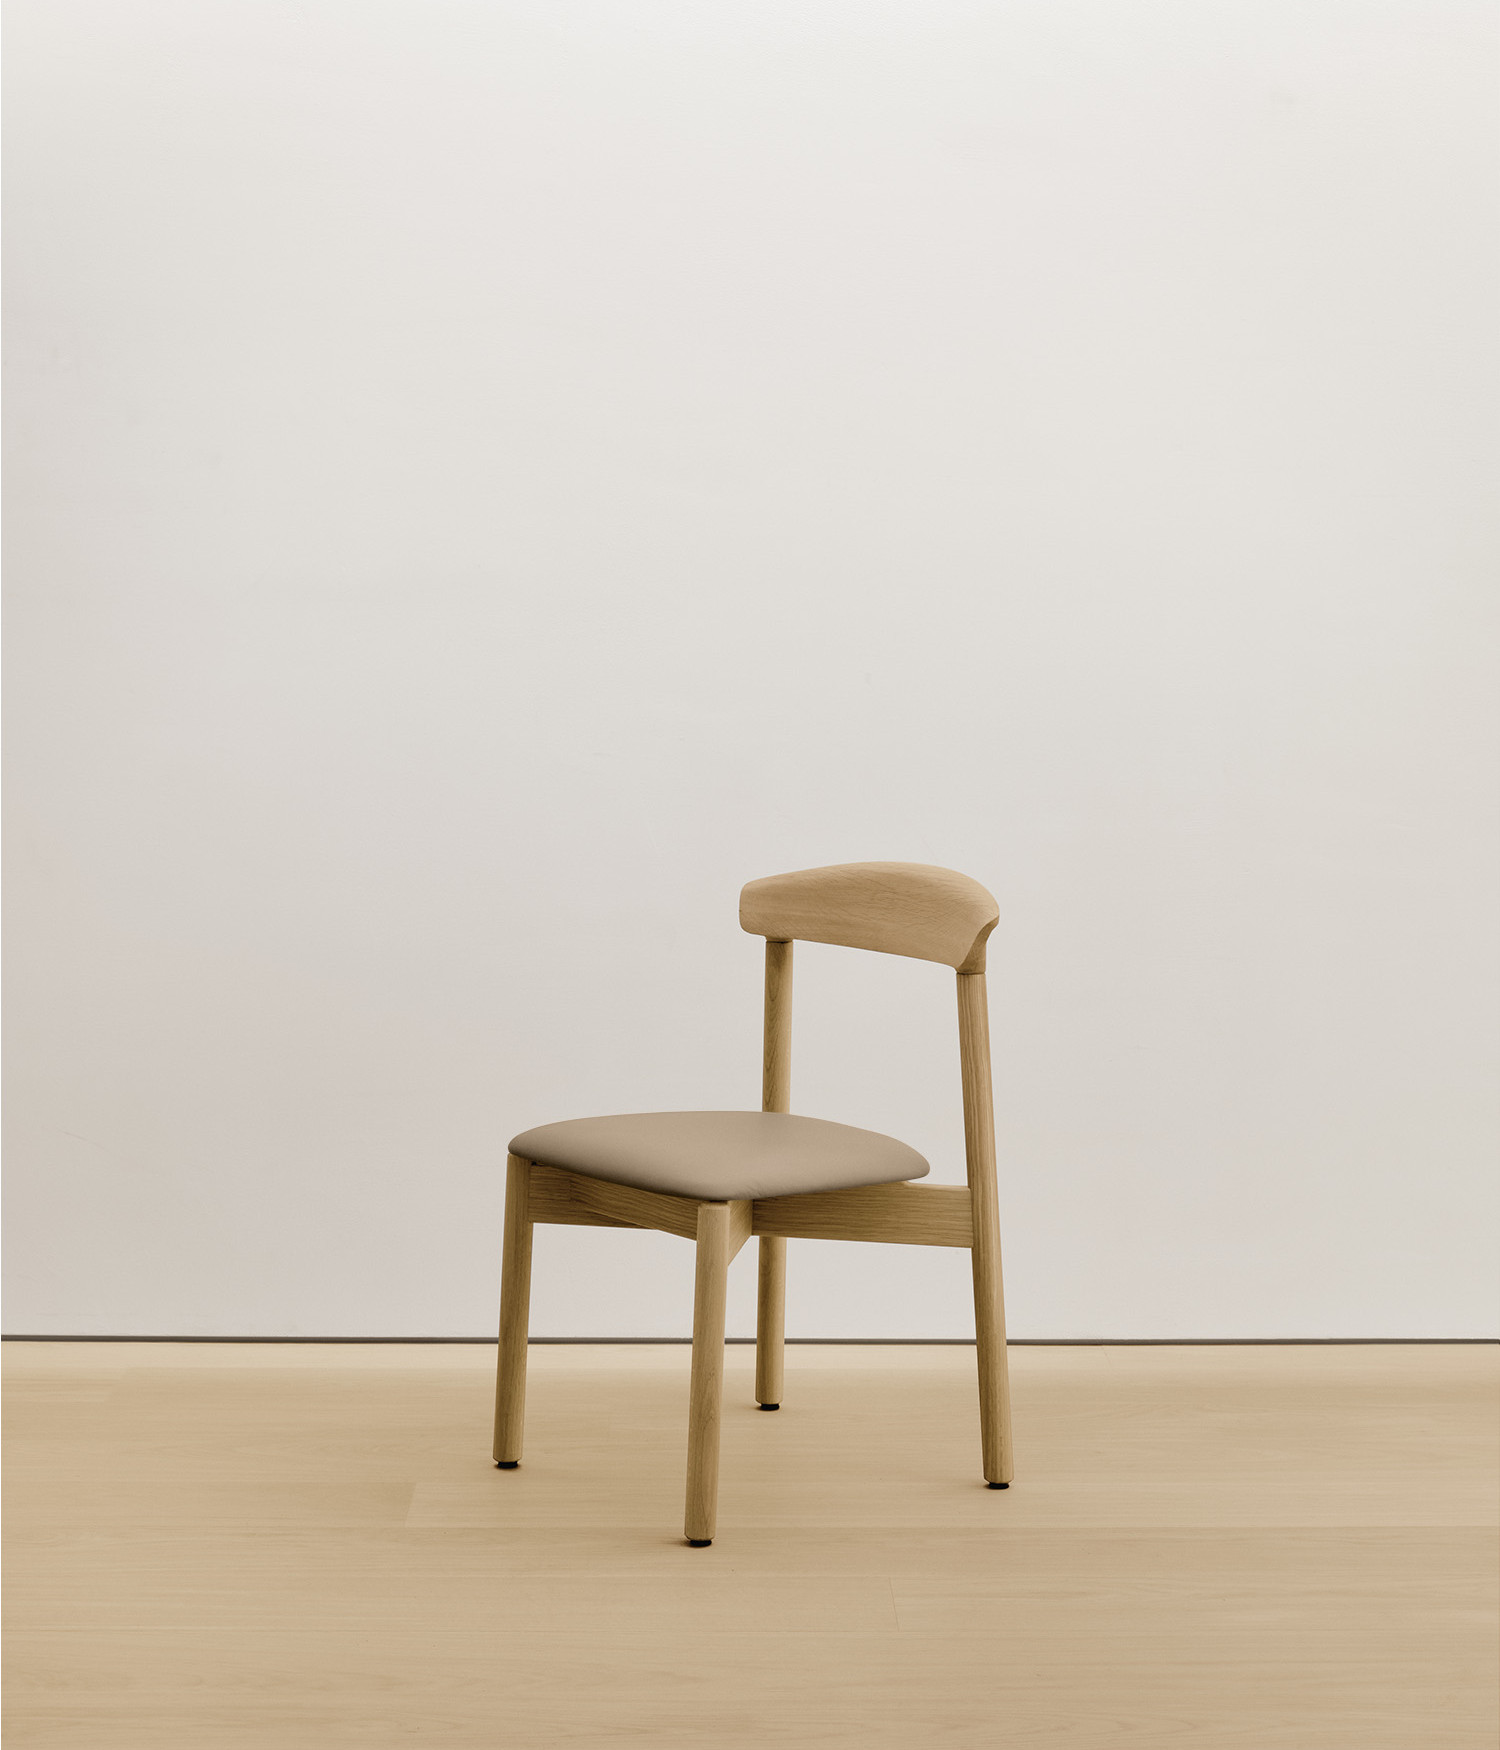  white-oak chair with cream color upholstered seat 